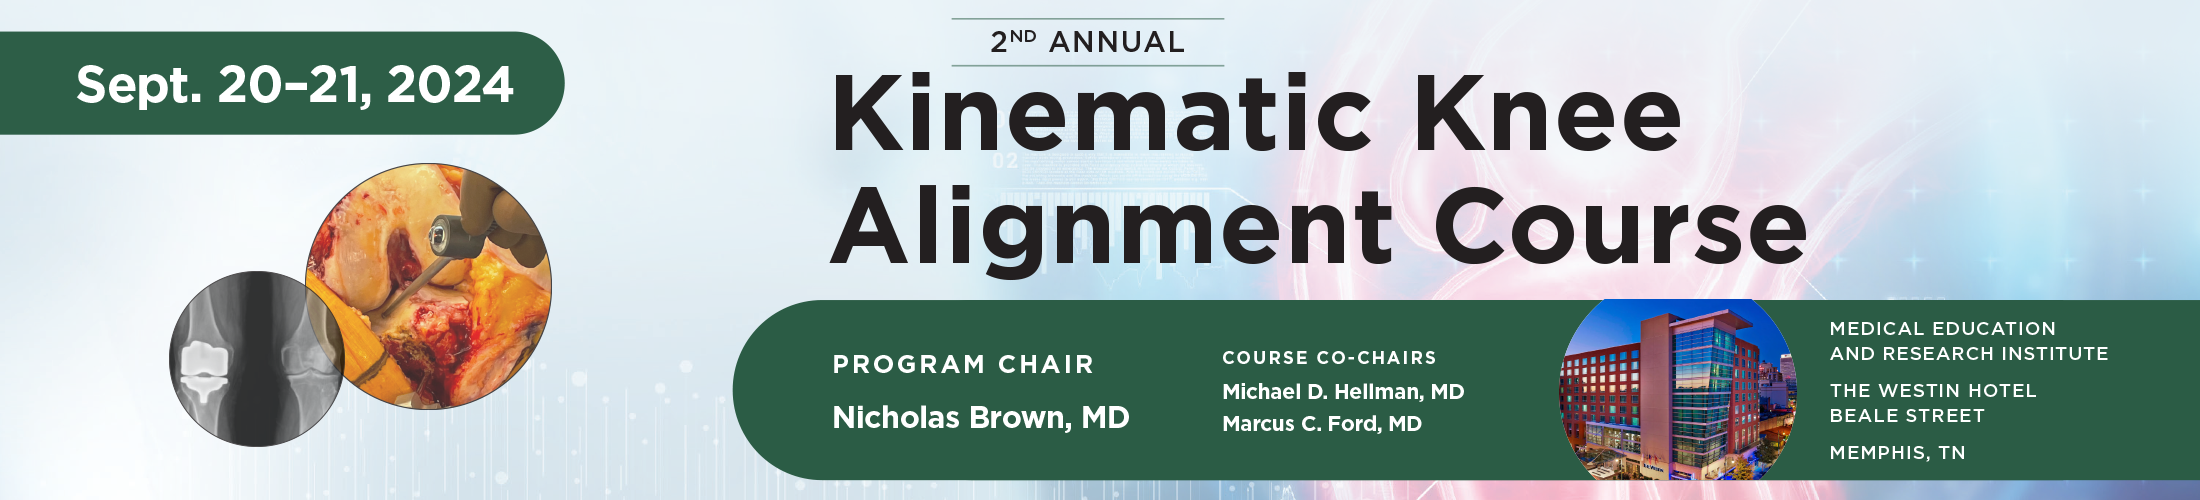 Kinematic Knee Course 2024